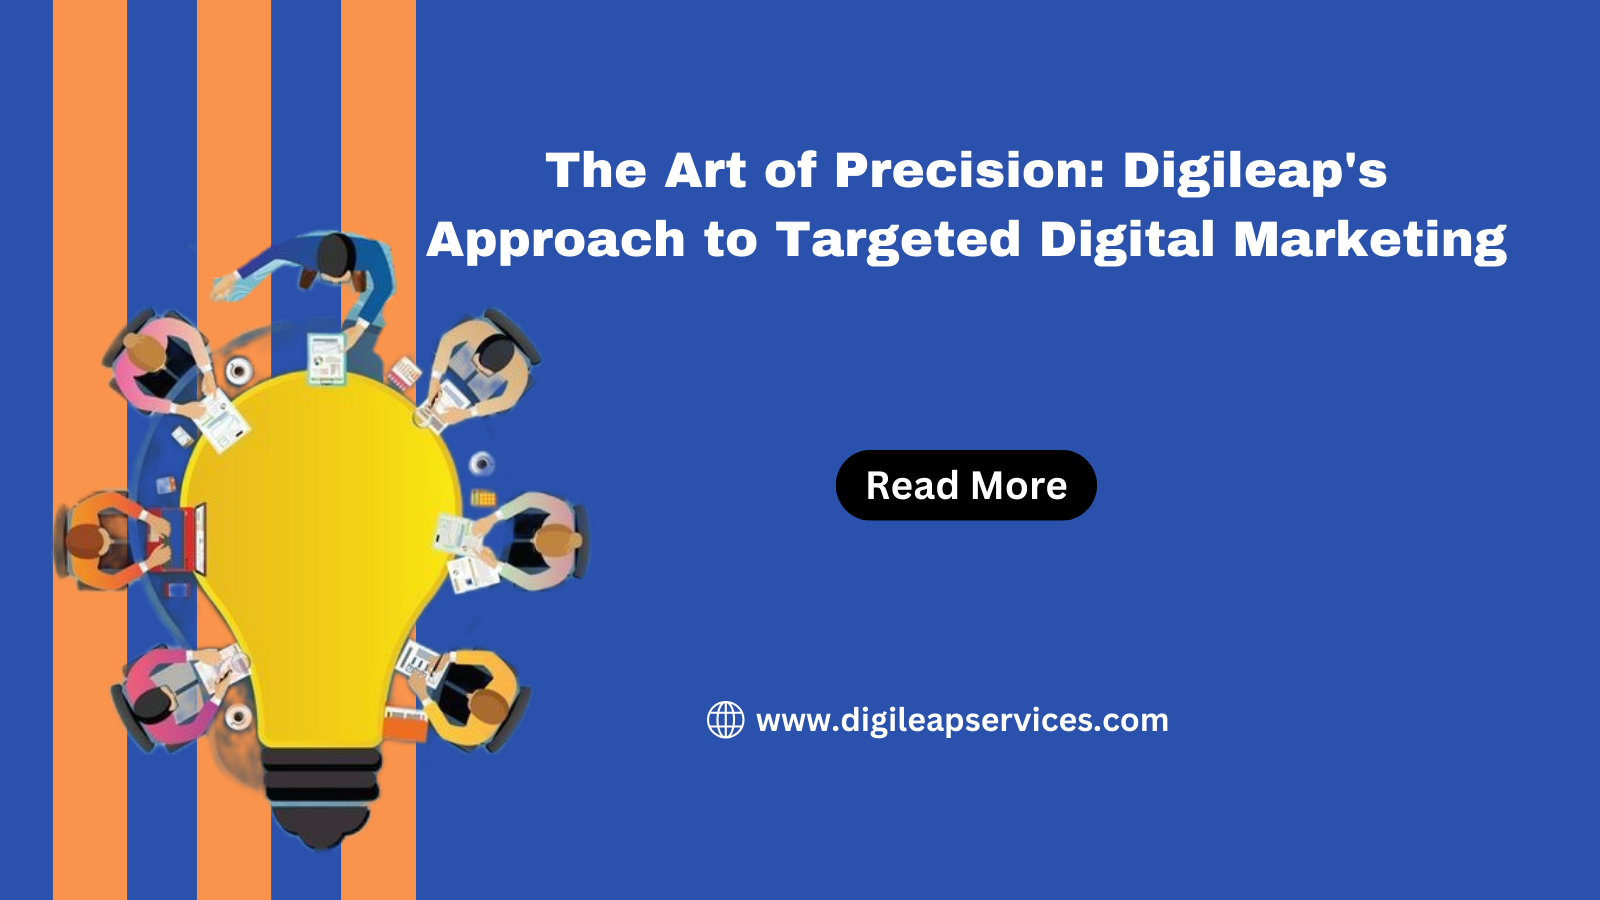 The Art of Precision: Digileap's Approach to Targeted Digital Marketing